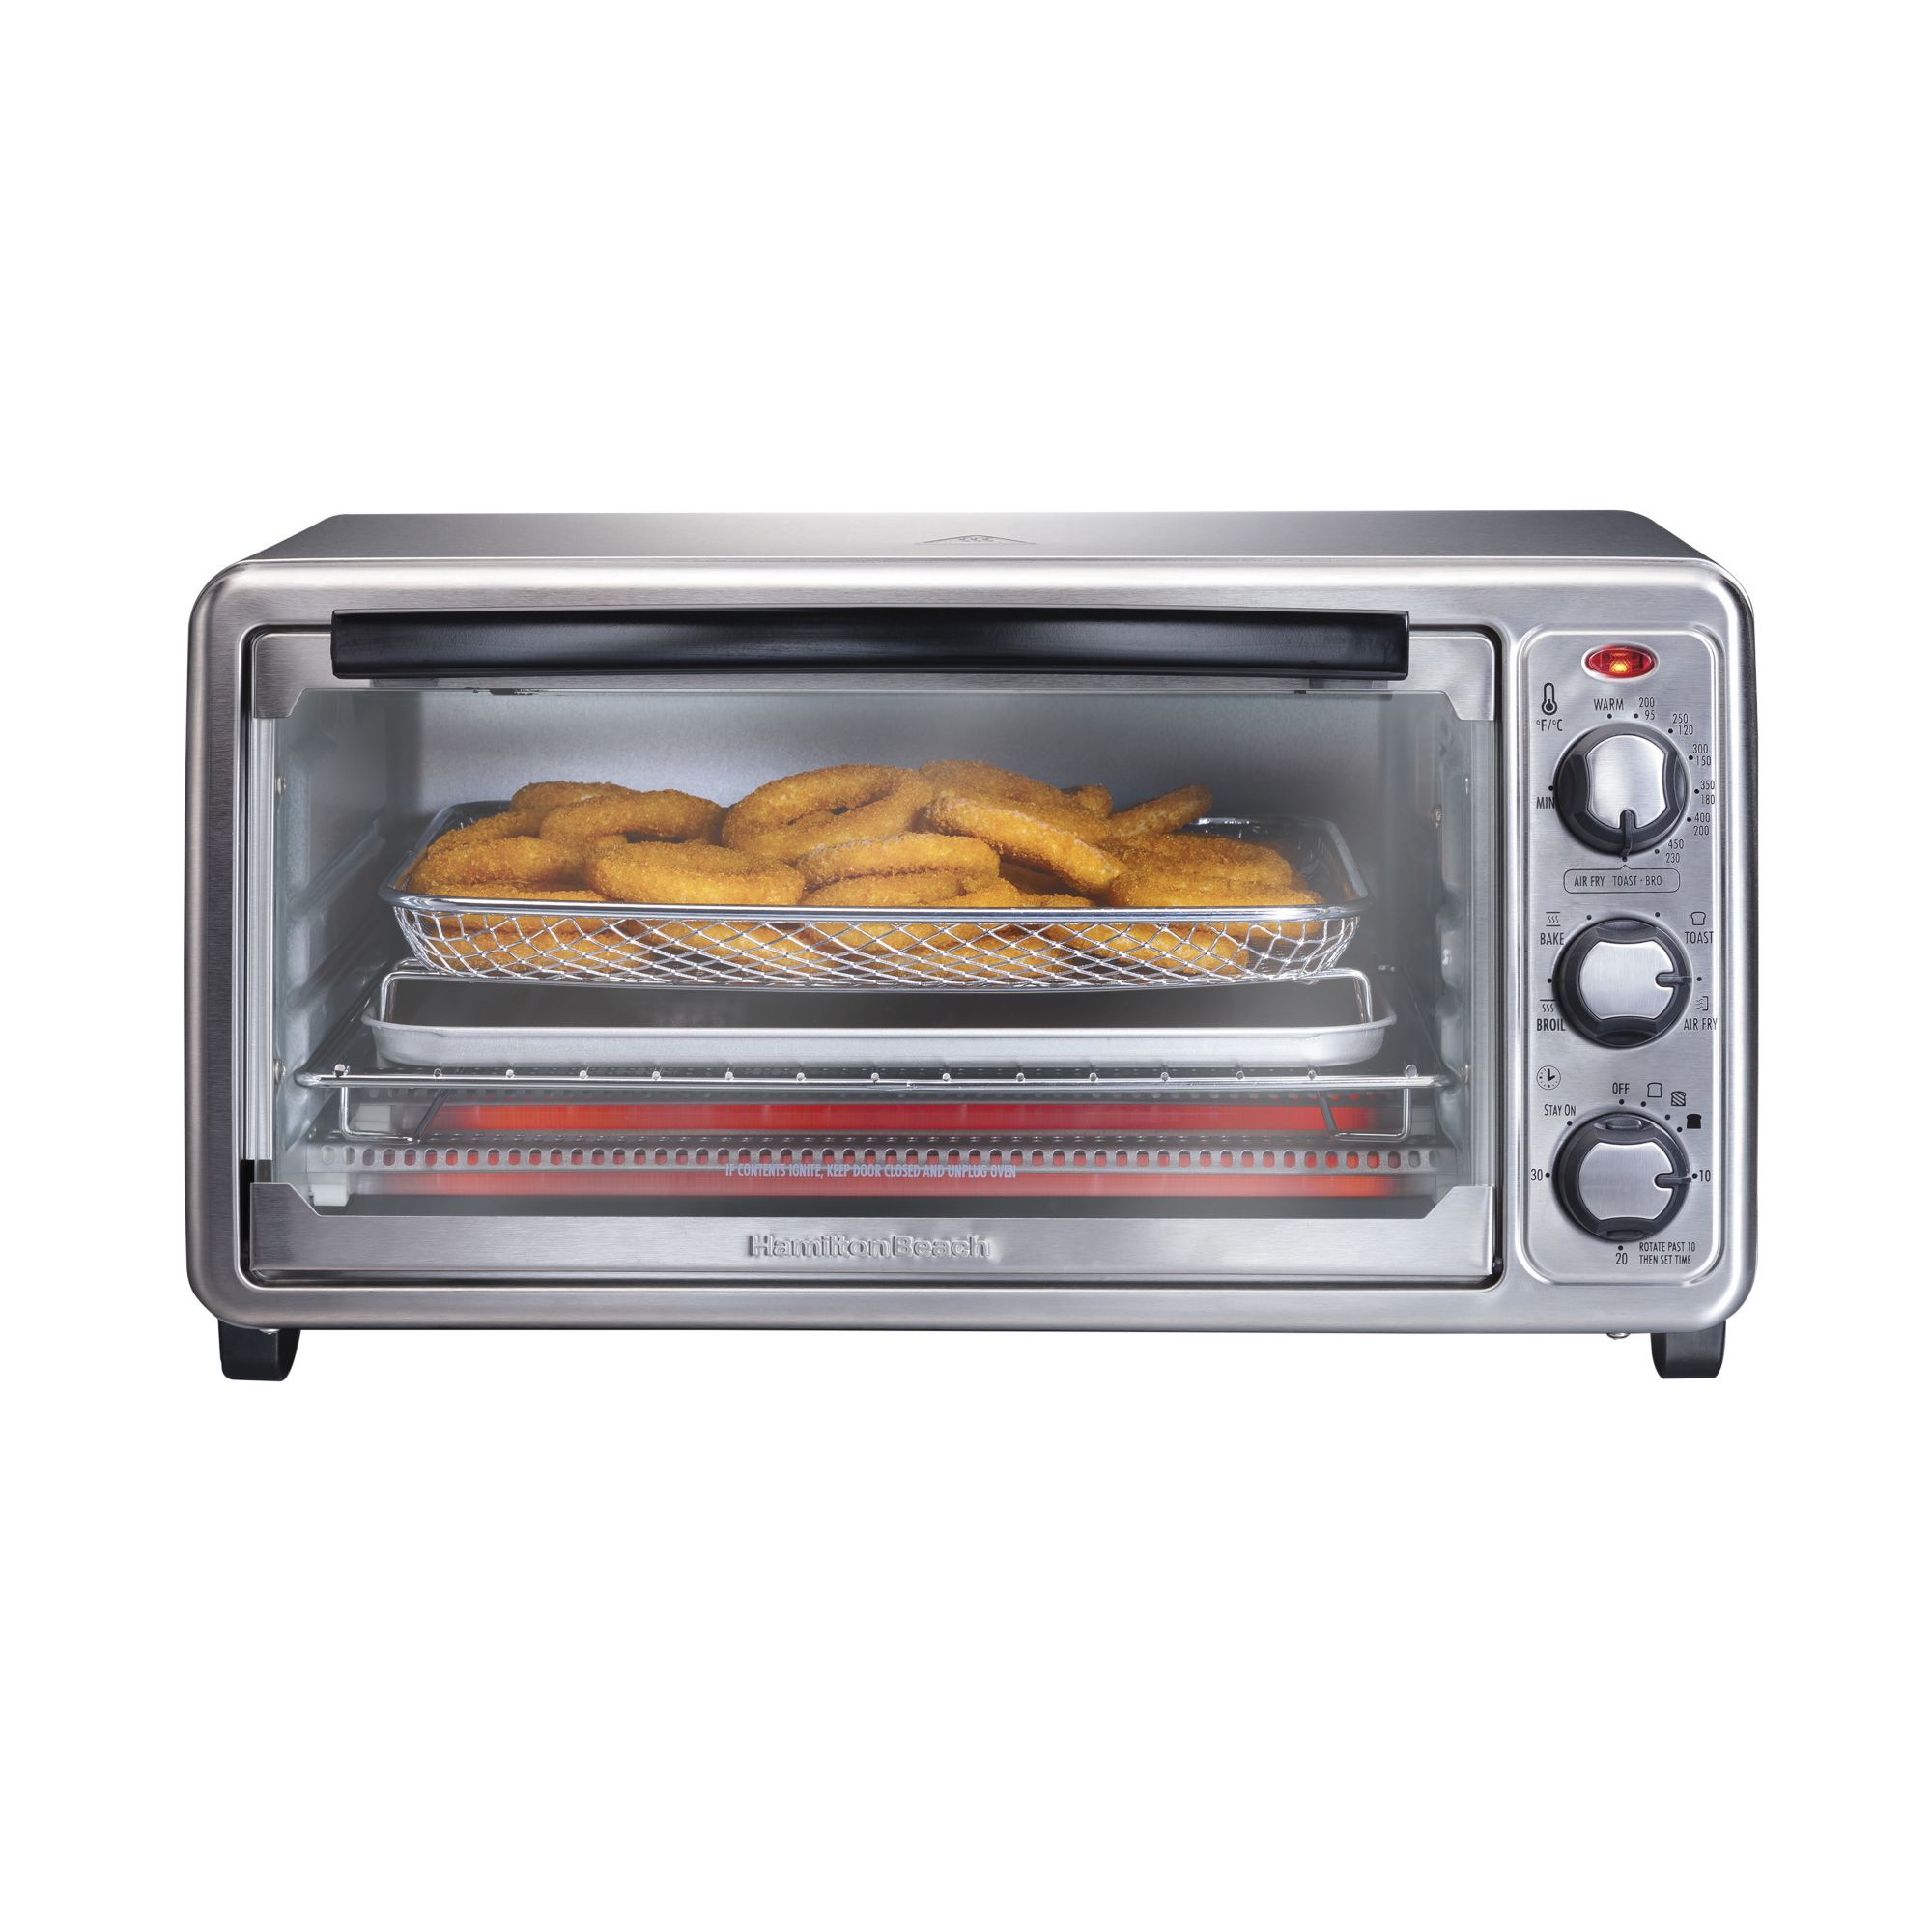 Zulay Kitchen RNAB0BPMWFJVP zulay airfryer toaster oven - large